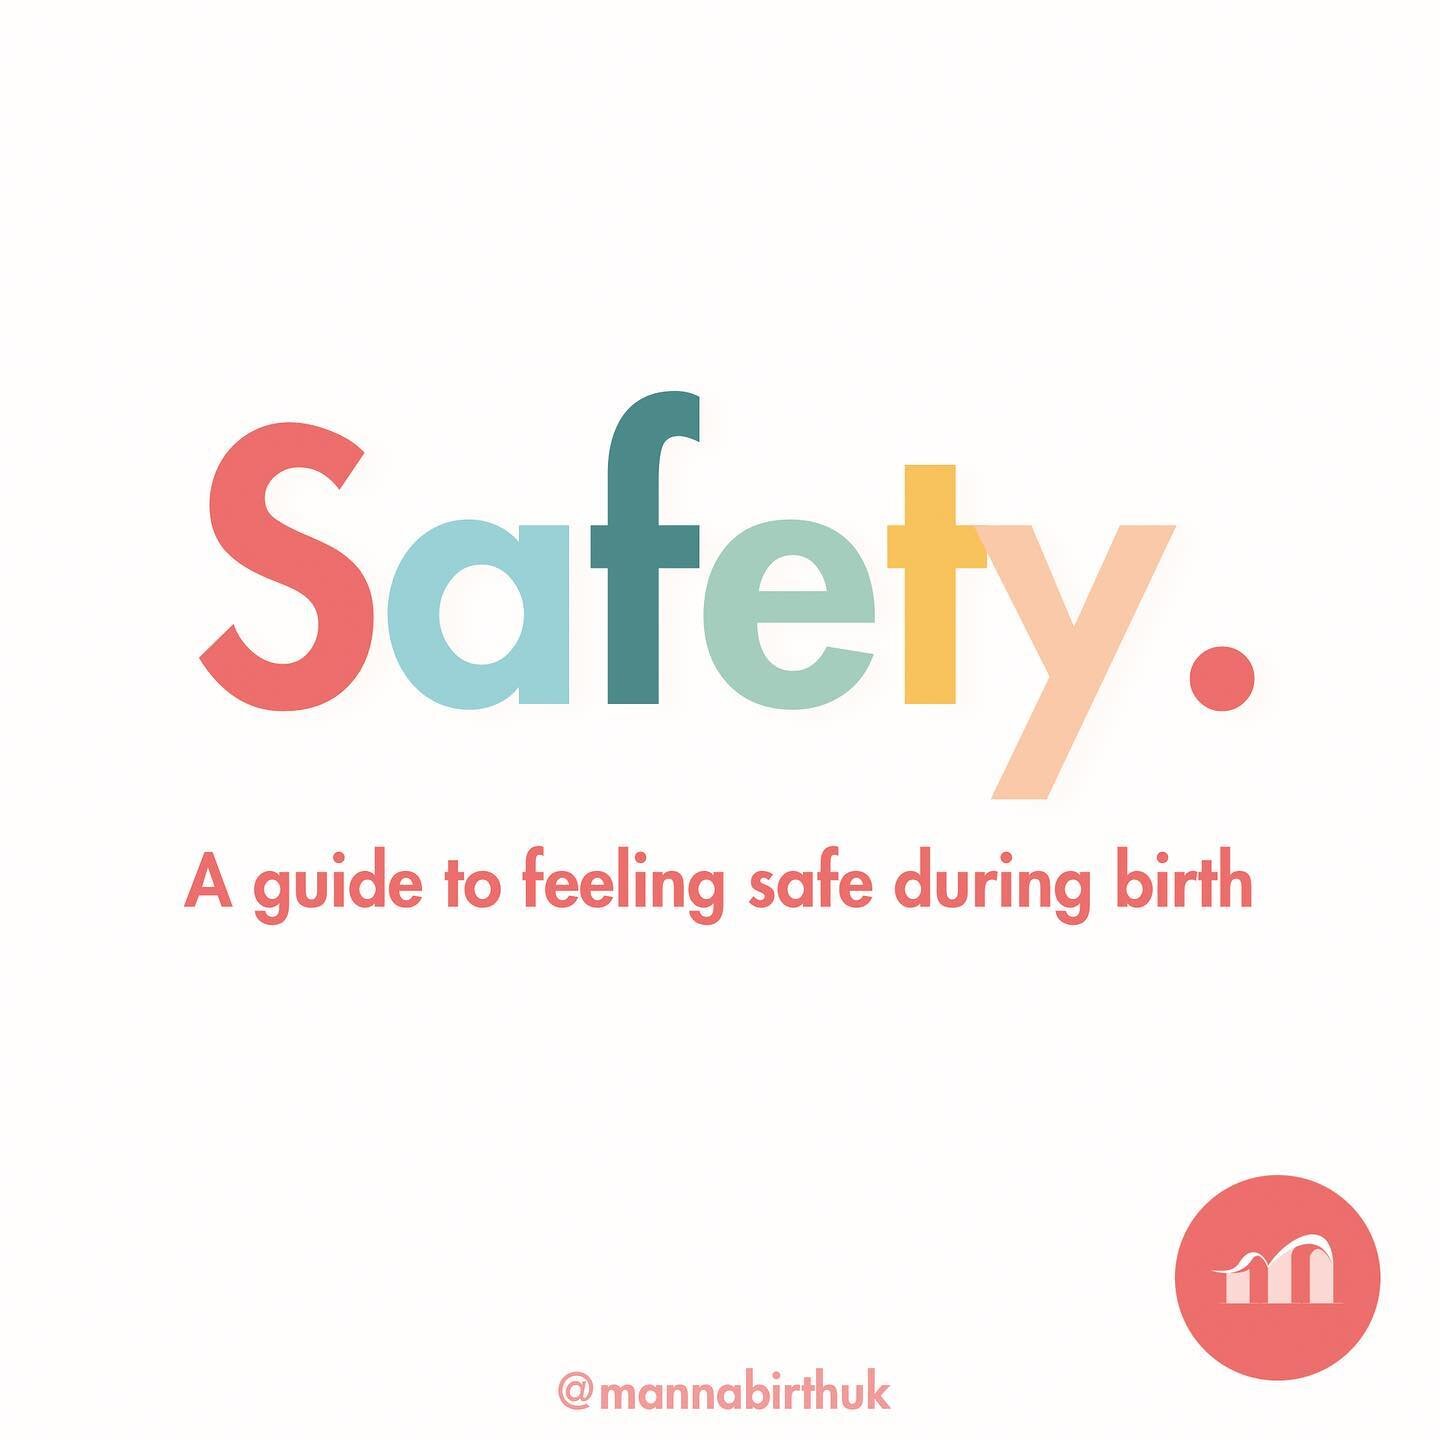 👀 Check out our blog for LOADS more information and guidance on feeling safe during birth here: https://www.mannabirth.co.uk/resources/feelingsafeinbirth

A positive birth experience is about ownership, feeling loved, cared for and safe. Safety can 